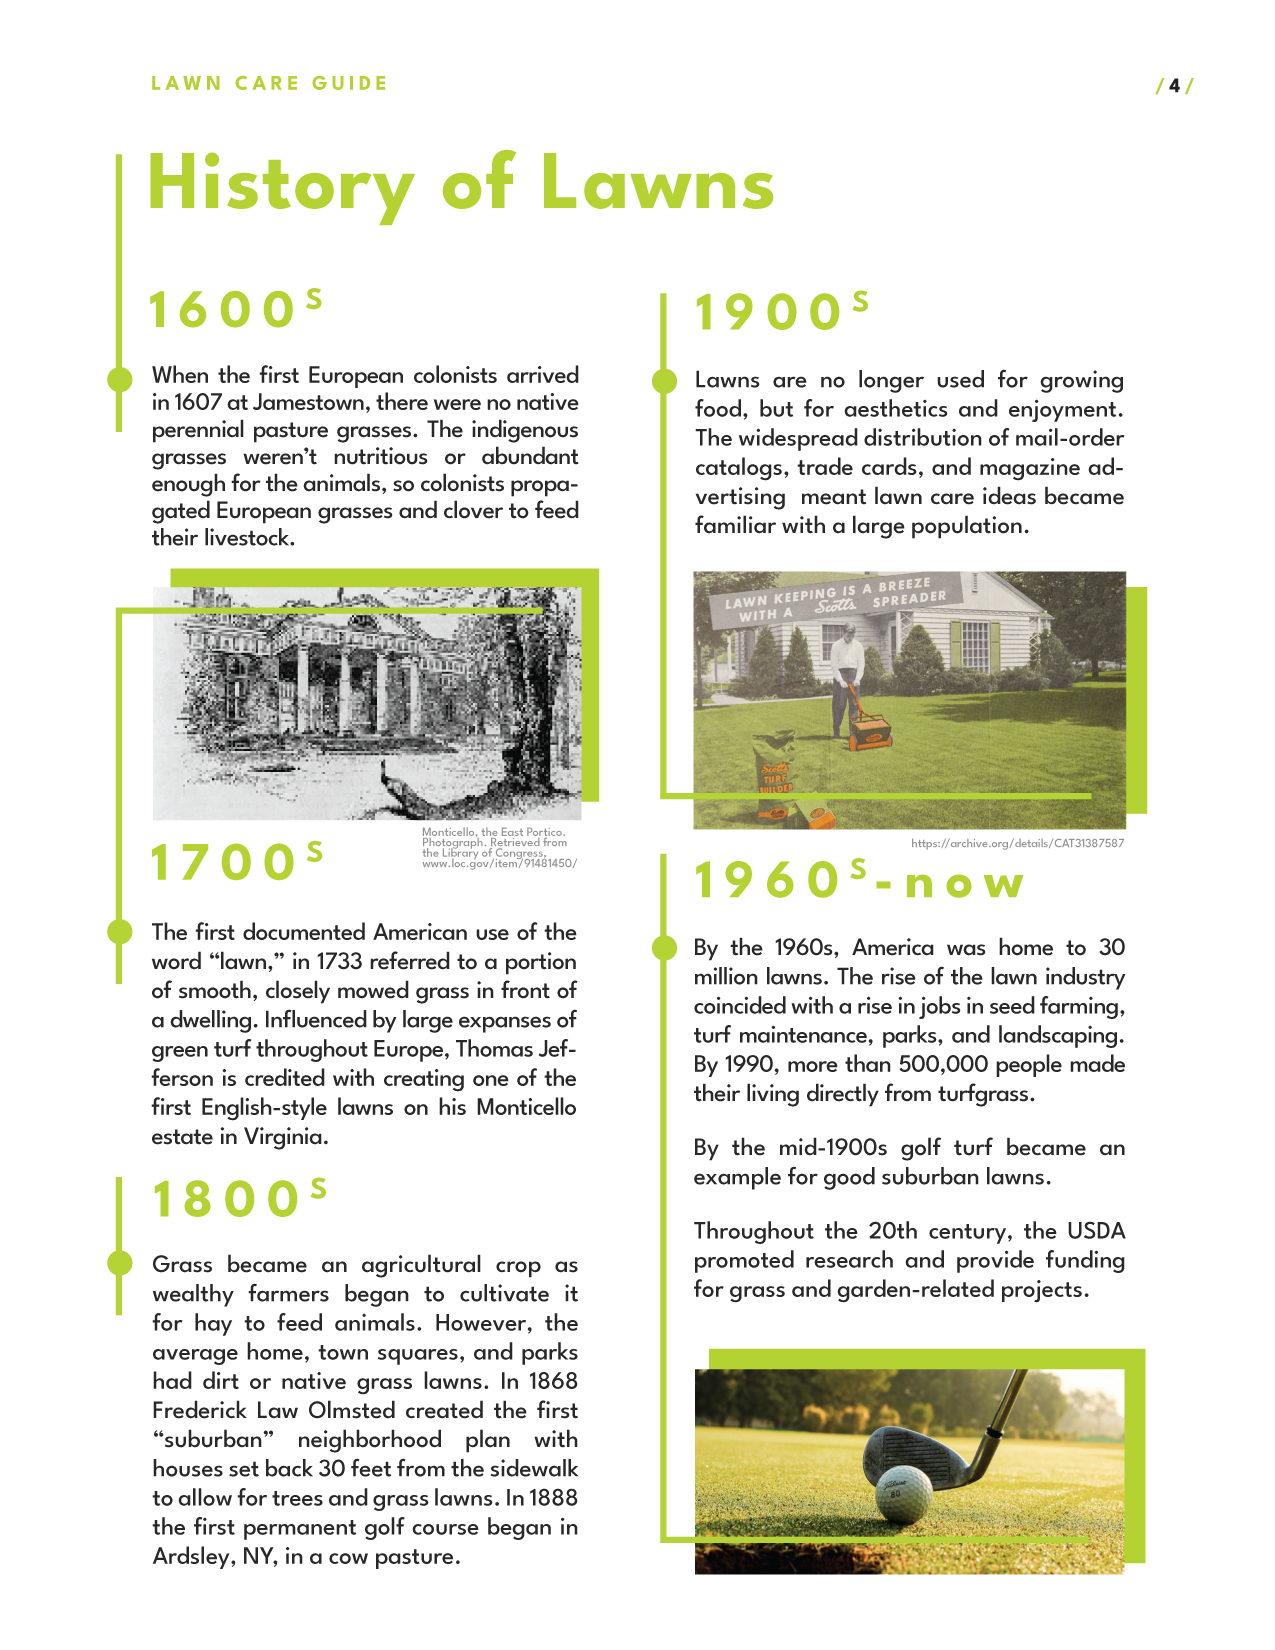 lawn care guide-04.png